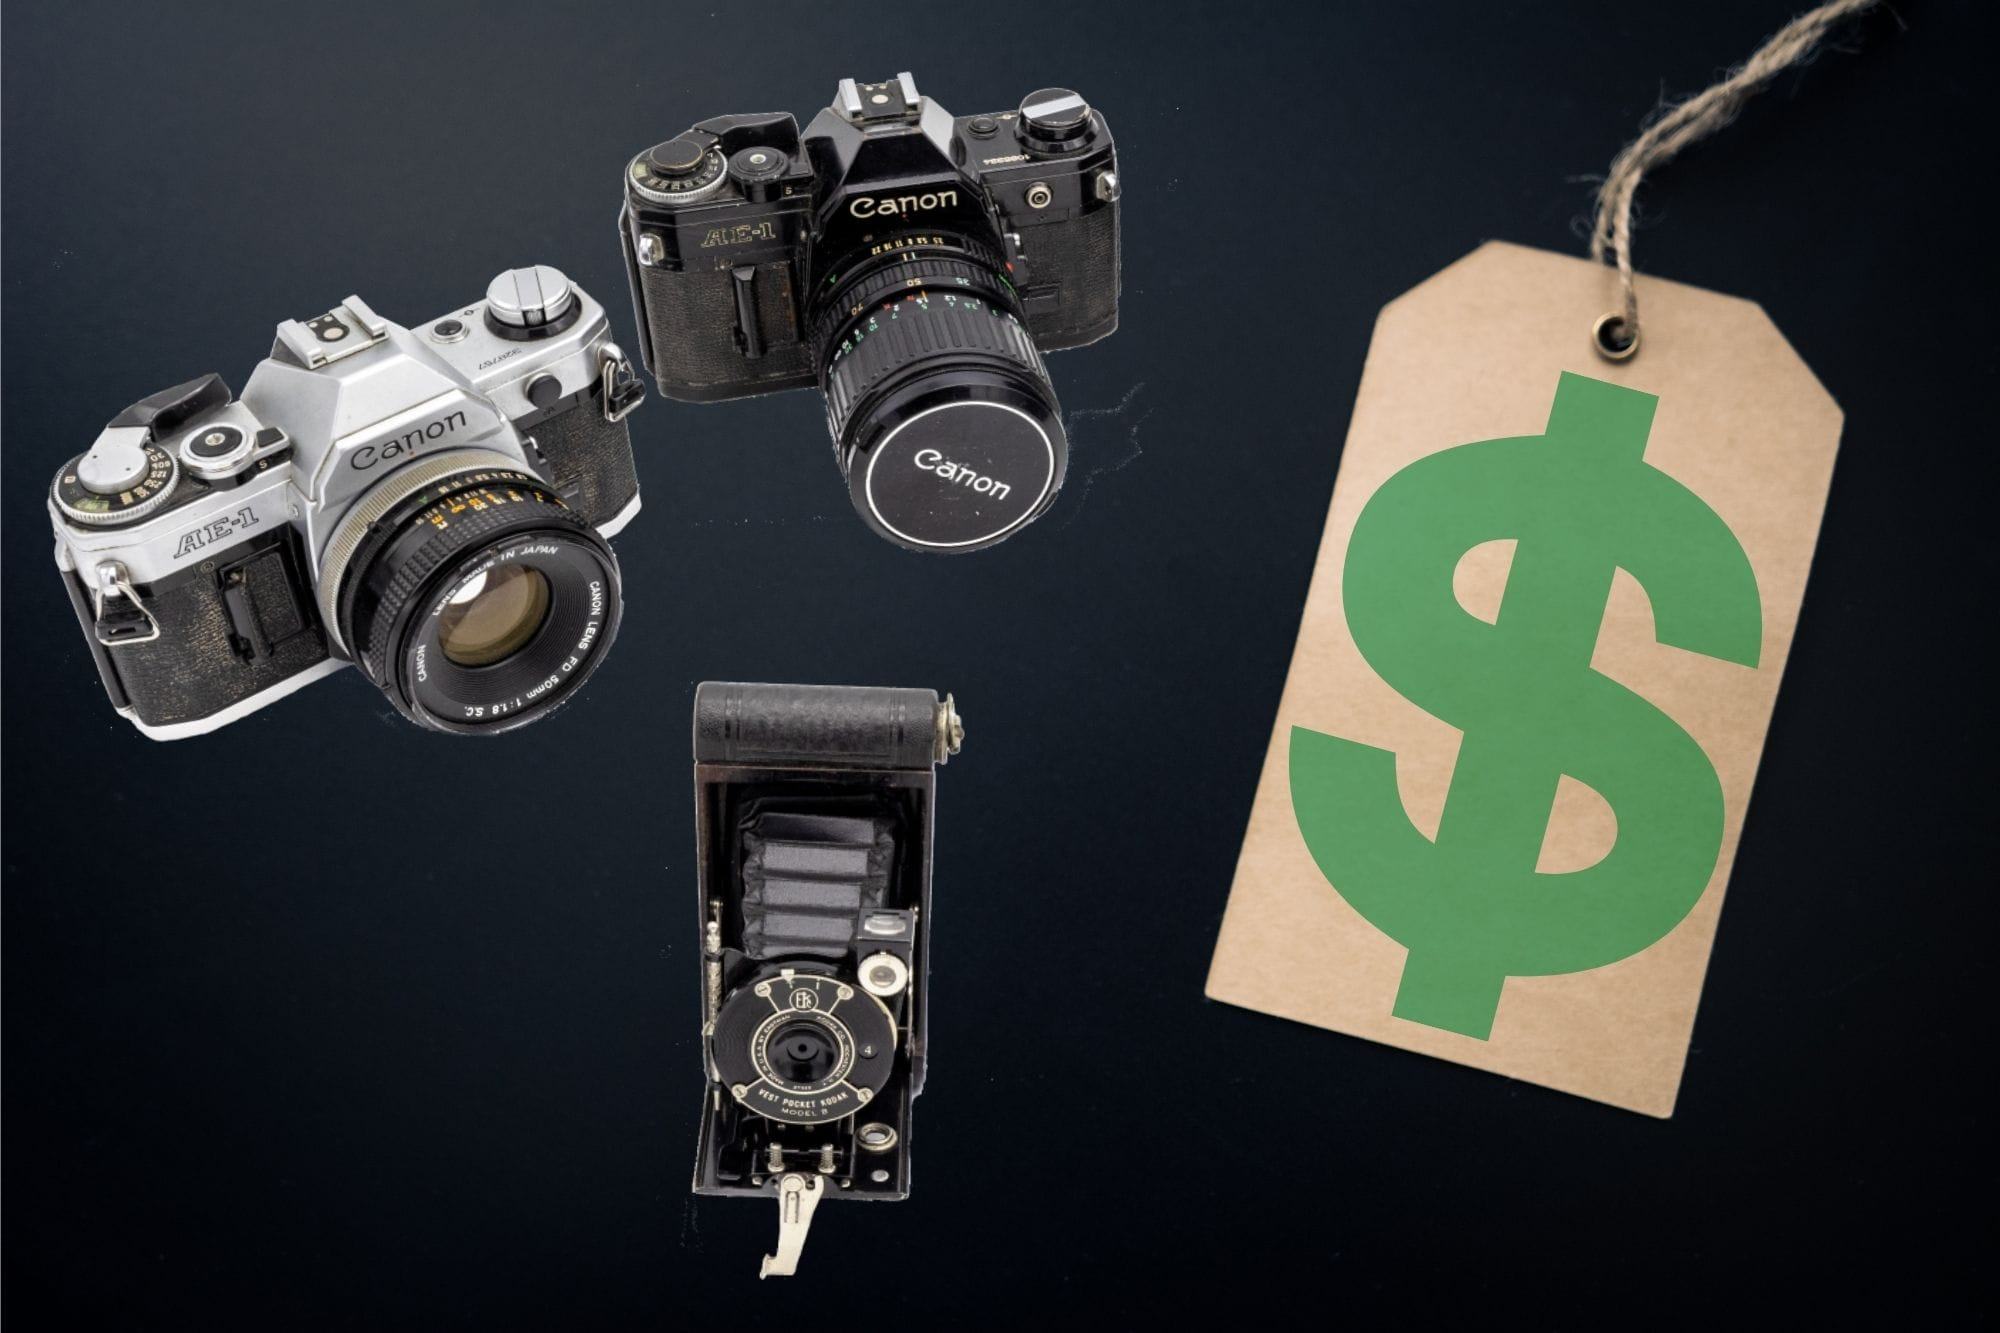 Where to Sell Used Cameras and Photography Gear